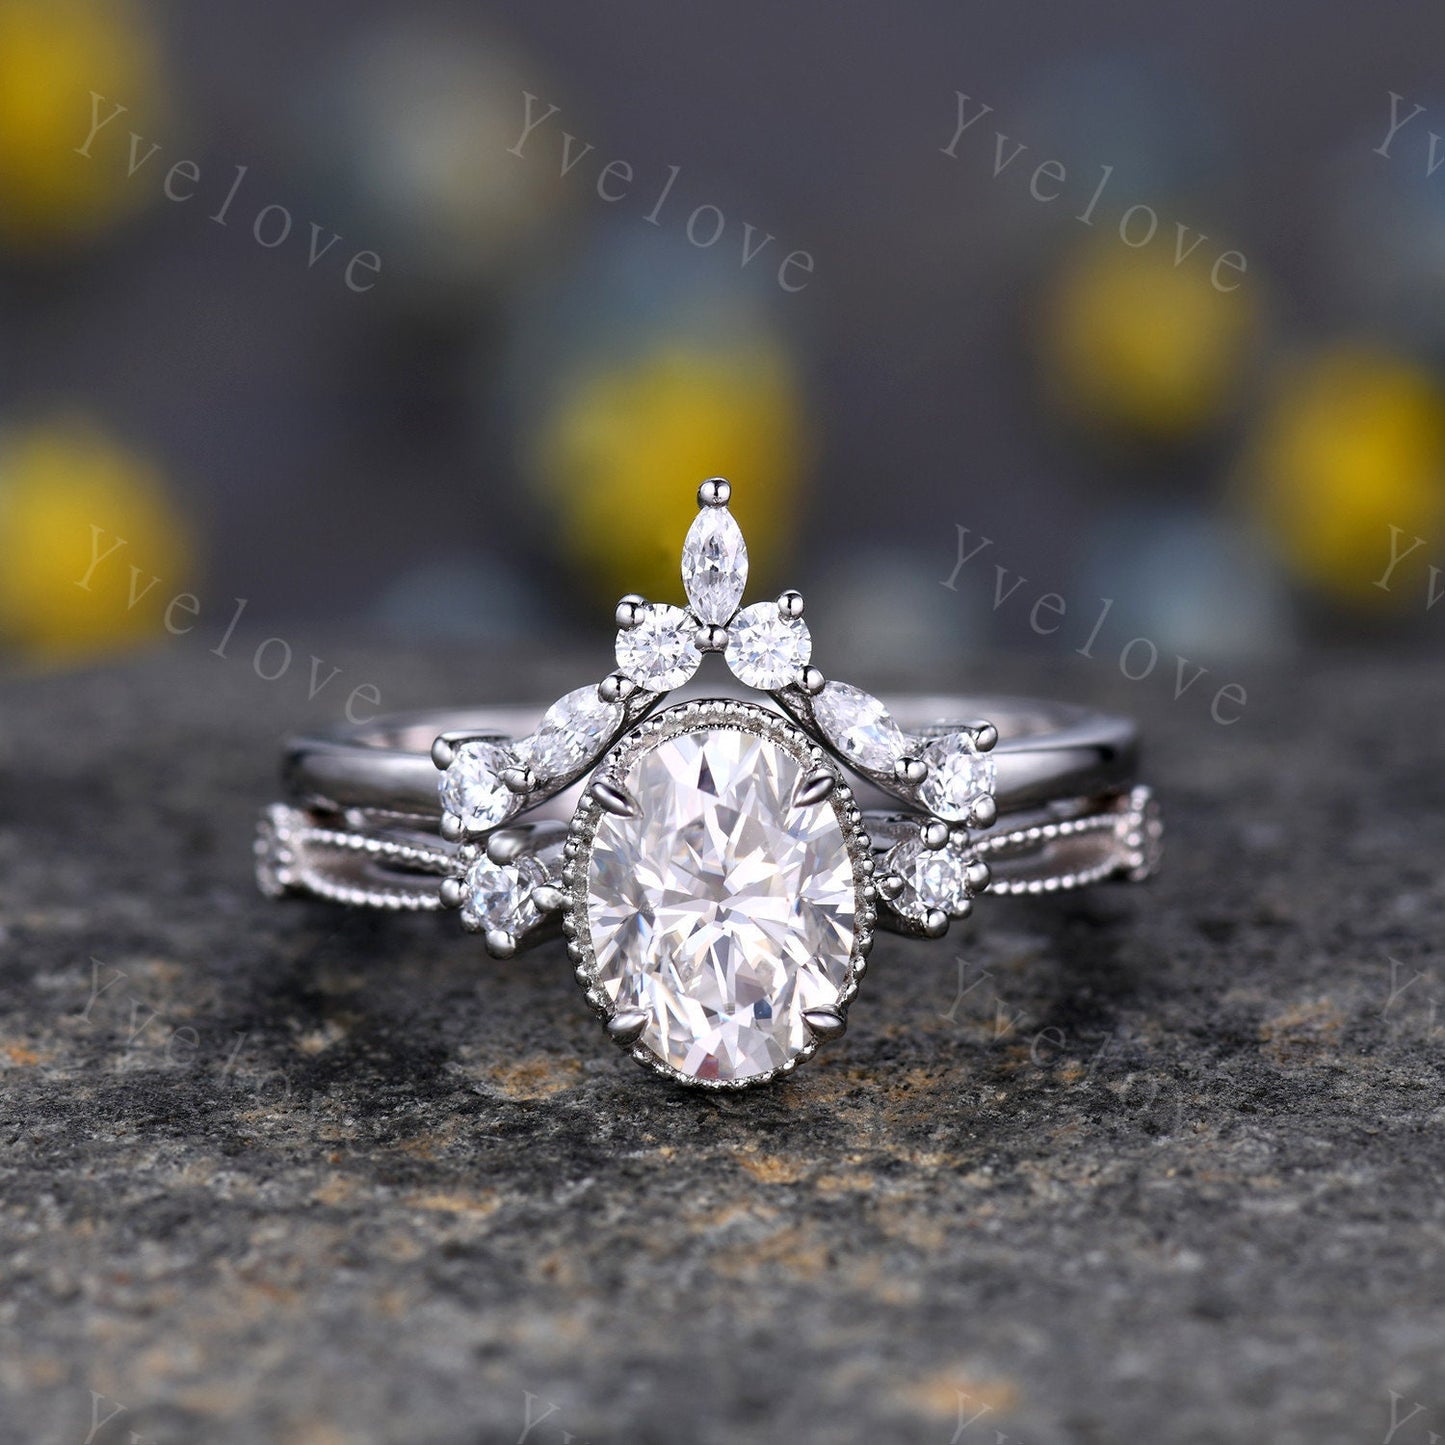 Oval moissanite engagement ring set white gold vintage engagement ring unique cluster marquise diamond wedding anniversary women ring set